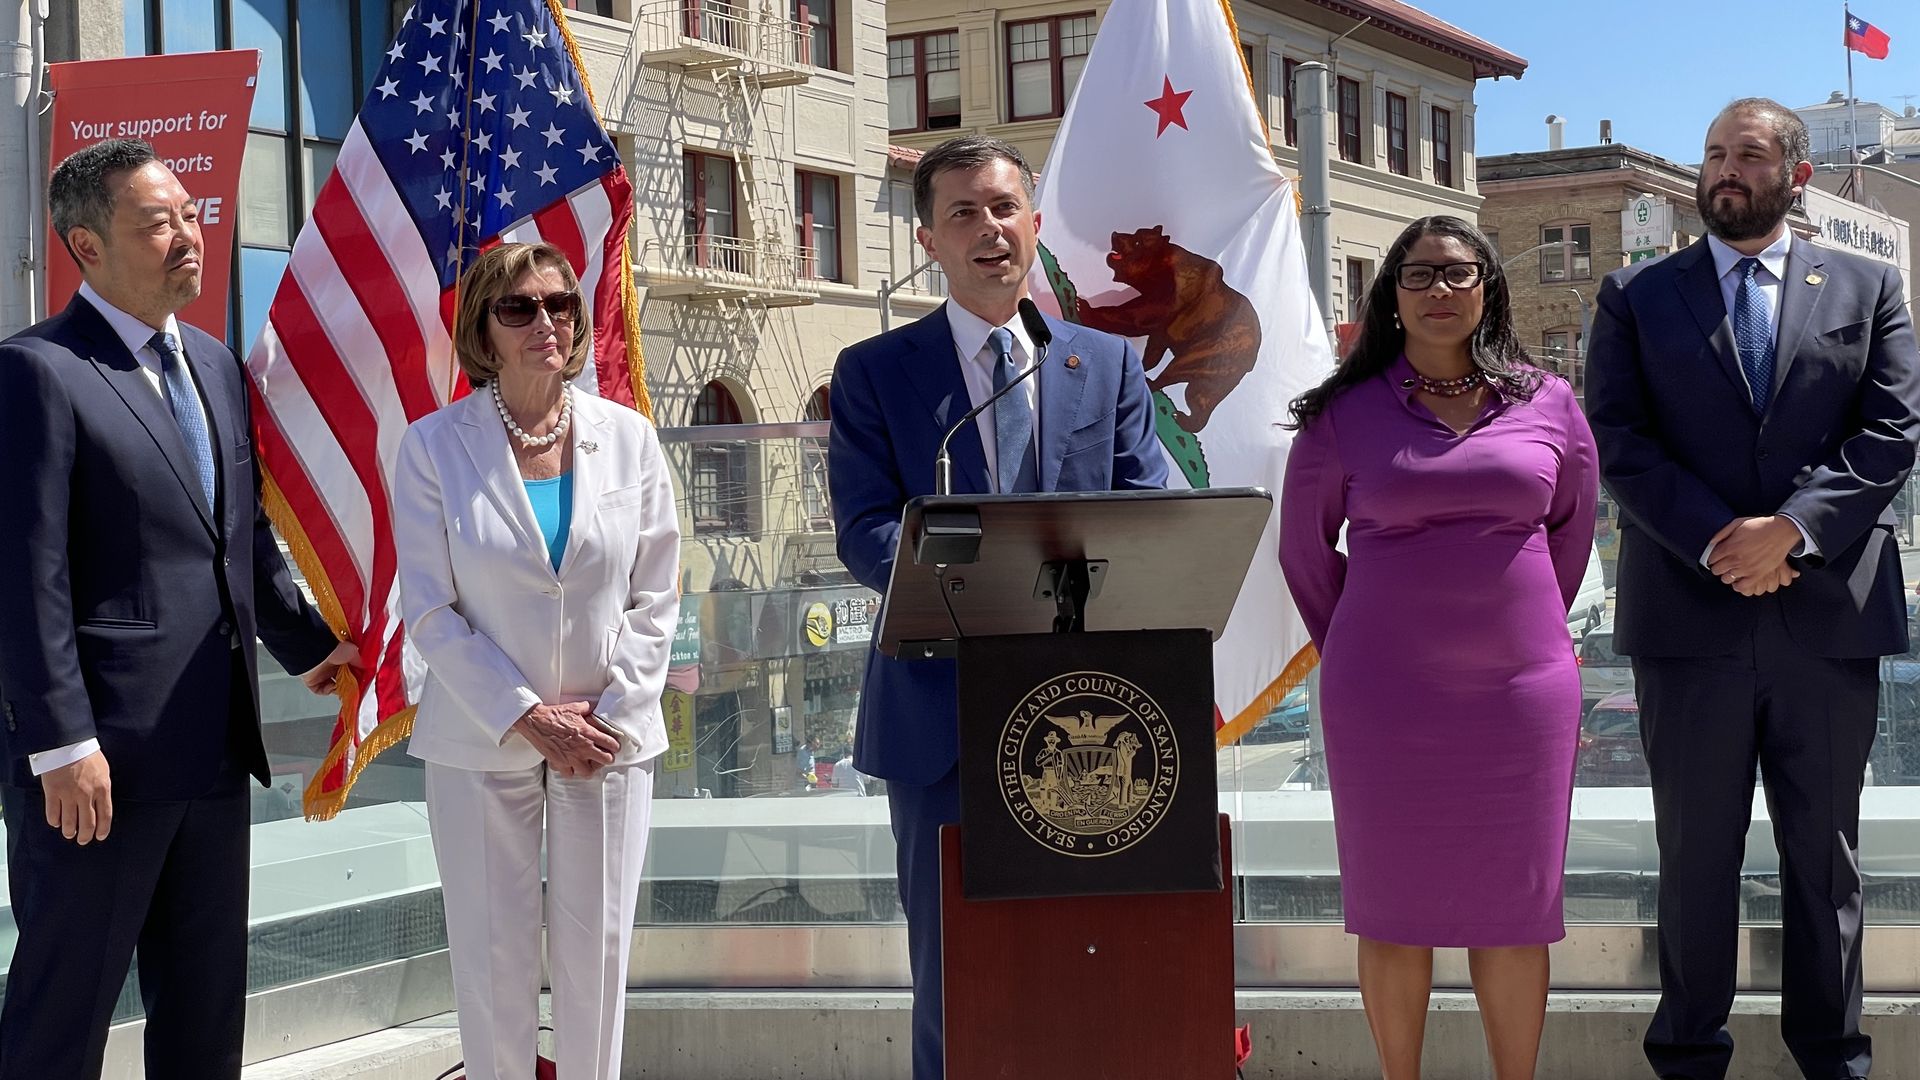 Nancy Pelosi, Pete Buttigieg and London Breed standing in front of U.S. and California state flag